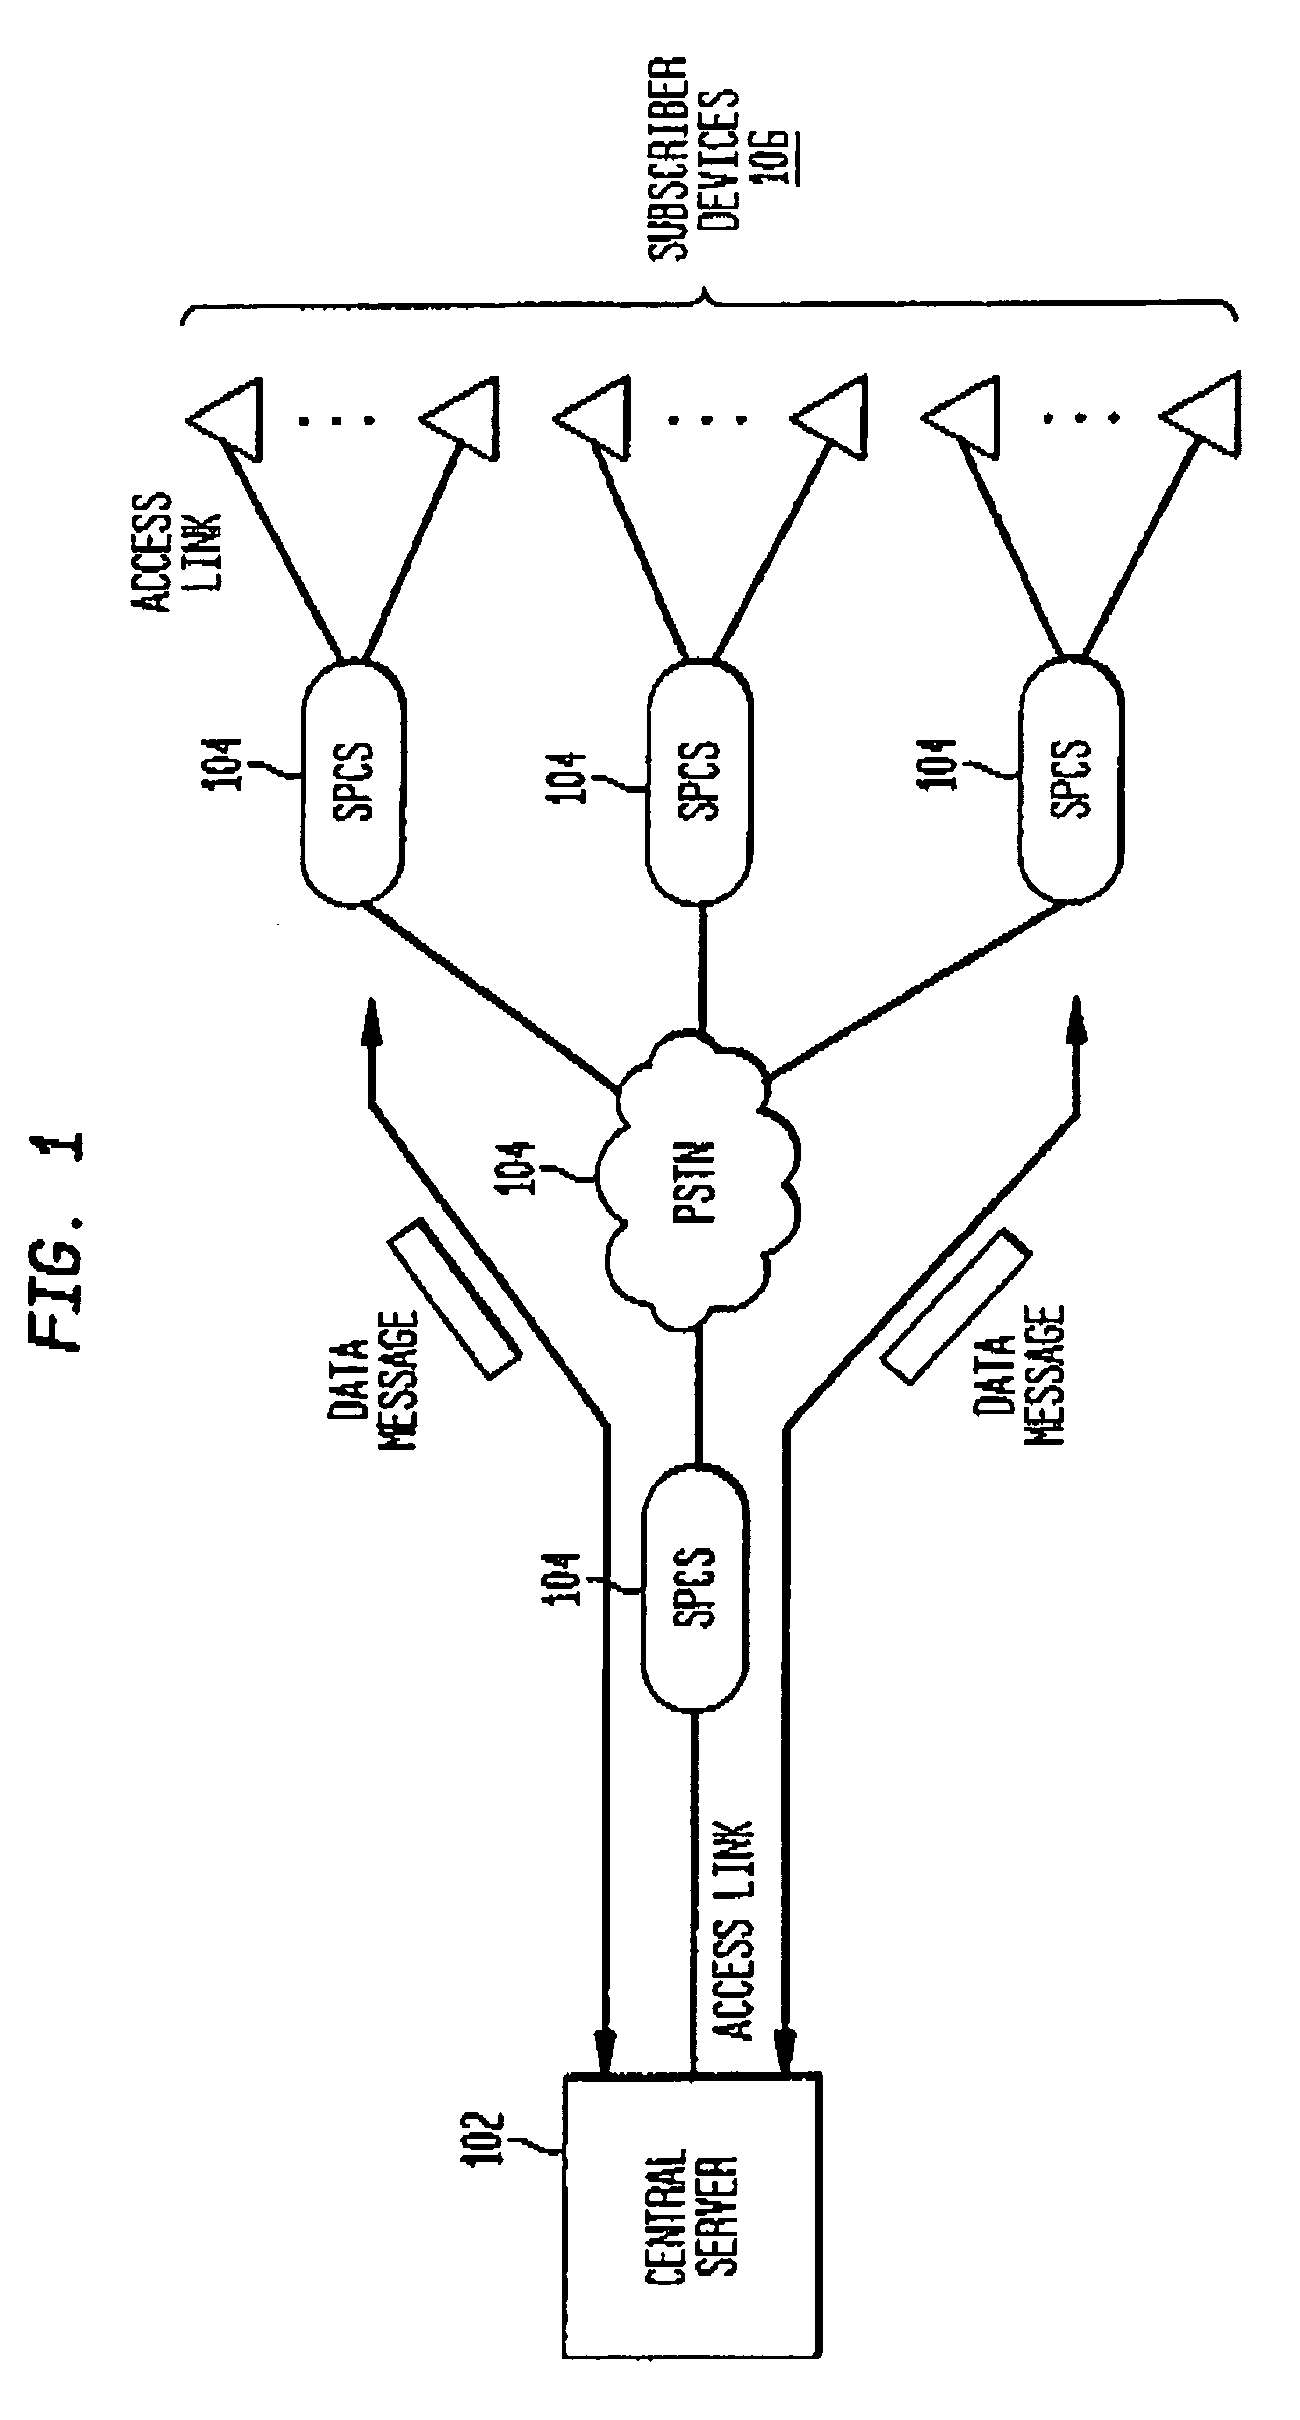 Method and system for transporting generic data messages over the public switched telephone network to customer premises equipment without establishing a call